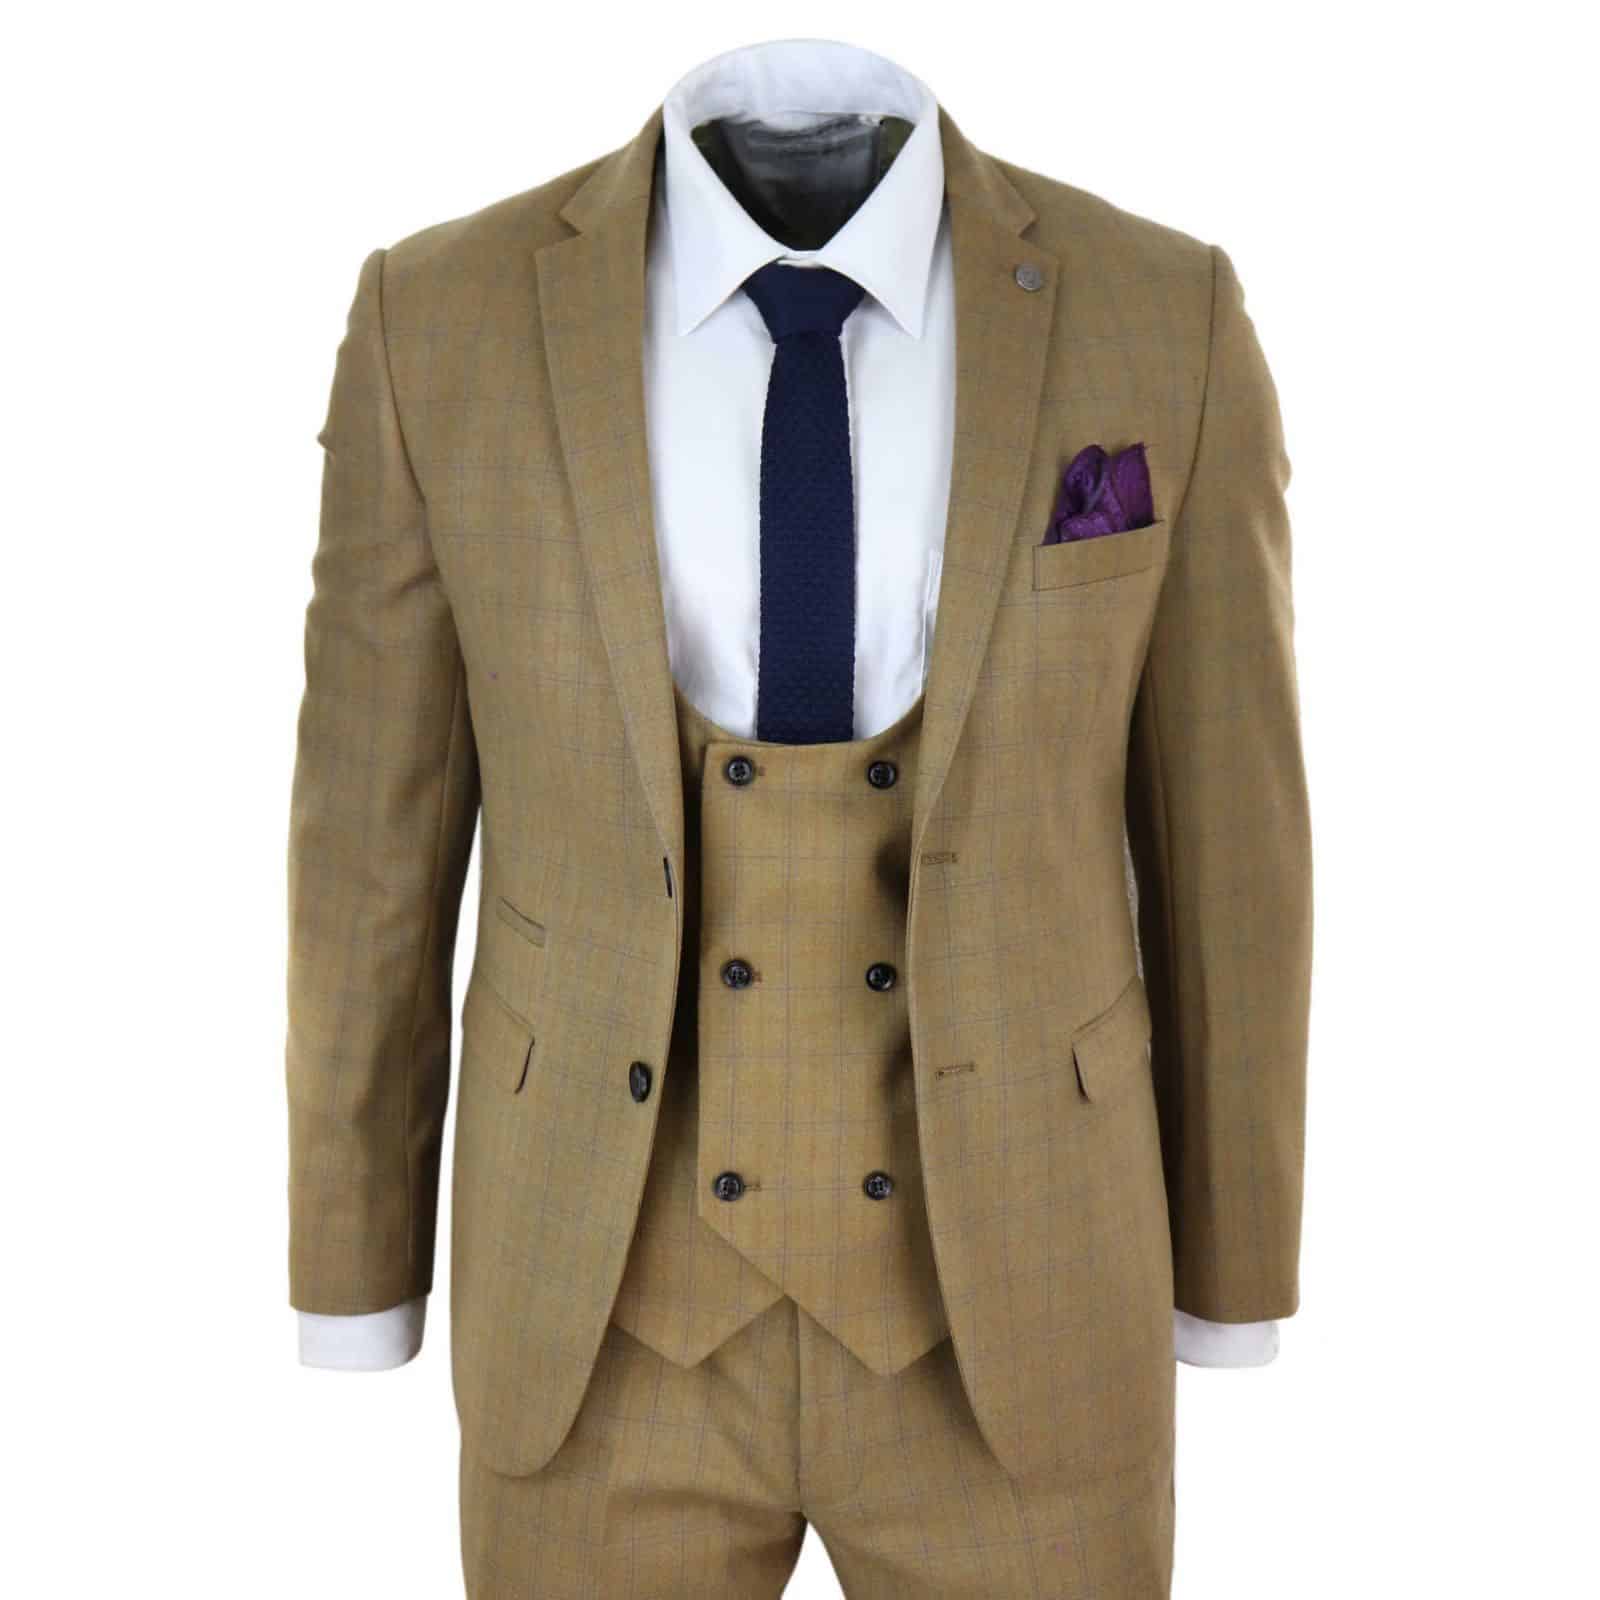 Mens 3 Piece Tan-Brown Suit with Double Breasted Waistcoat - Paul Andrew Ford